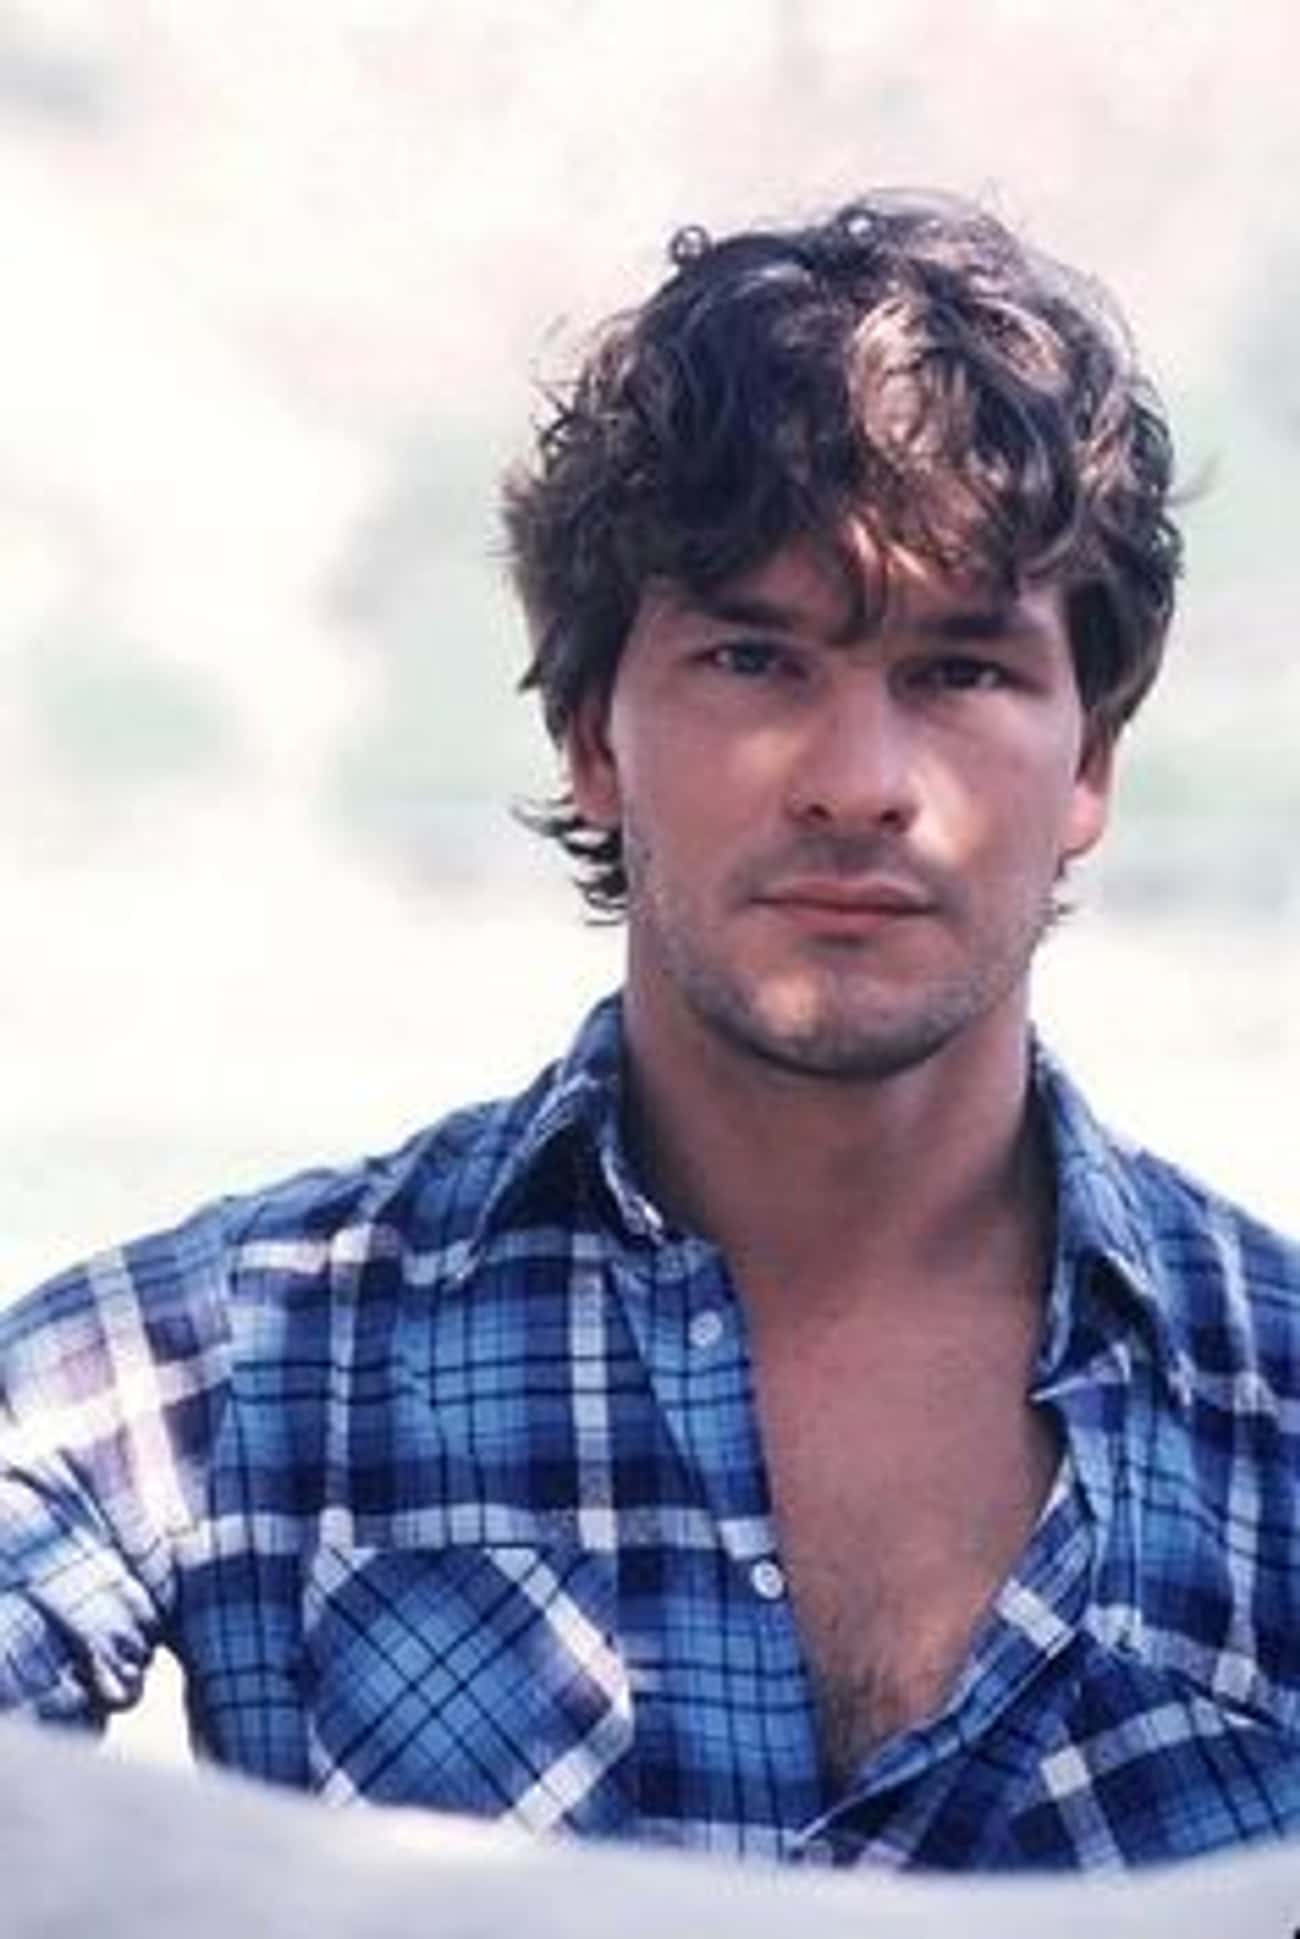 Young Patrick Swayze in Blue Plaid Shirt